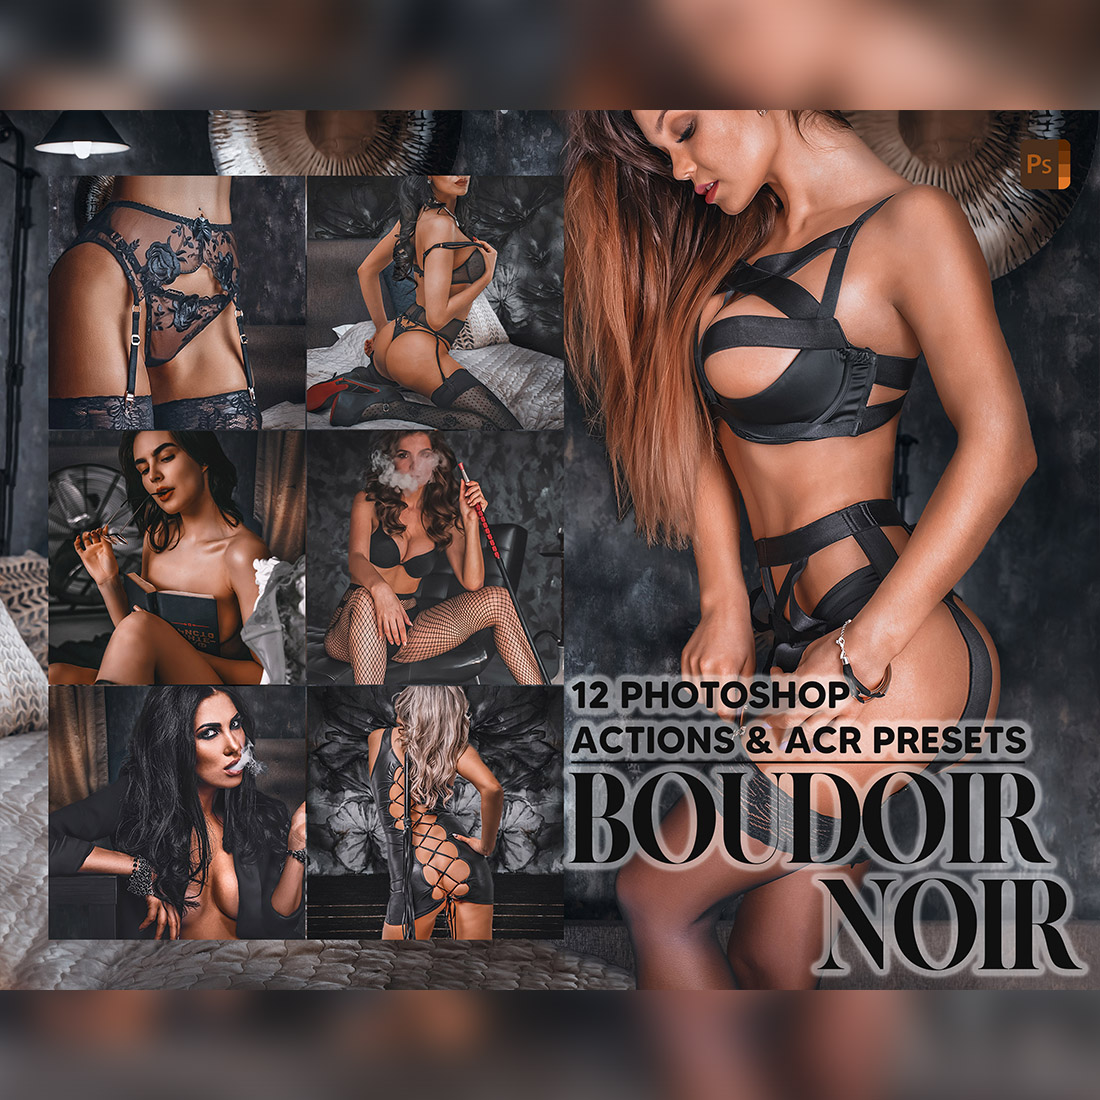 12 Photoshop Actions, Boudoir Noir Ps Action, Moody Sexy ACR Preset, Warm Nude Ps Filter, Atn Portrait And Lifestyle Theme Instagram Blogger cover image.